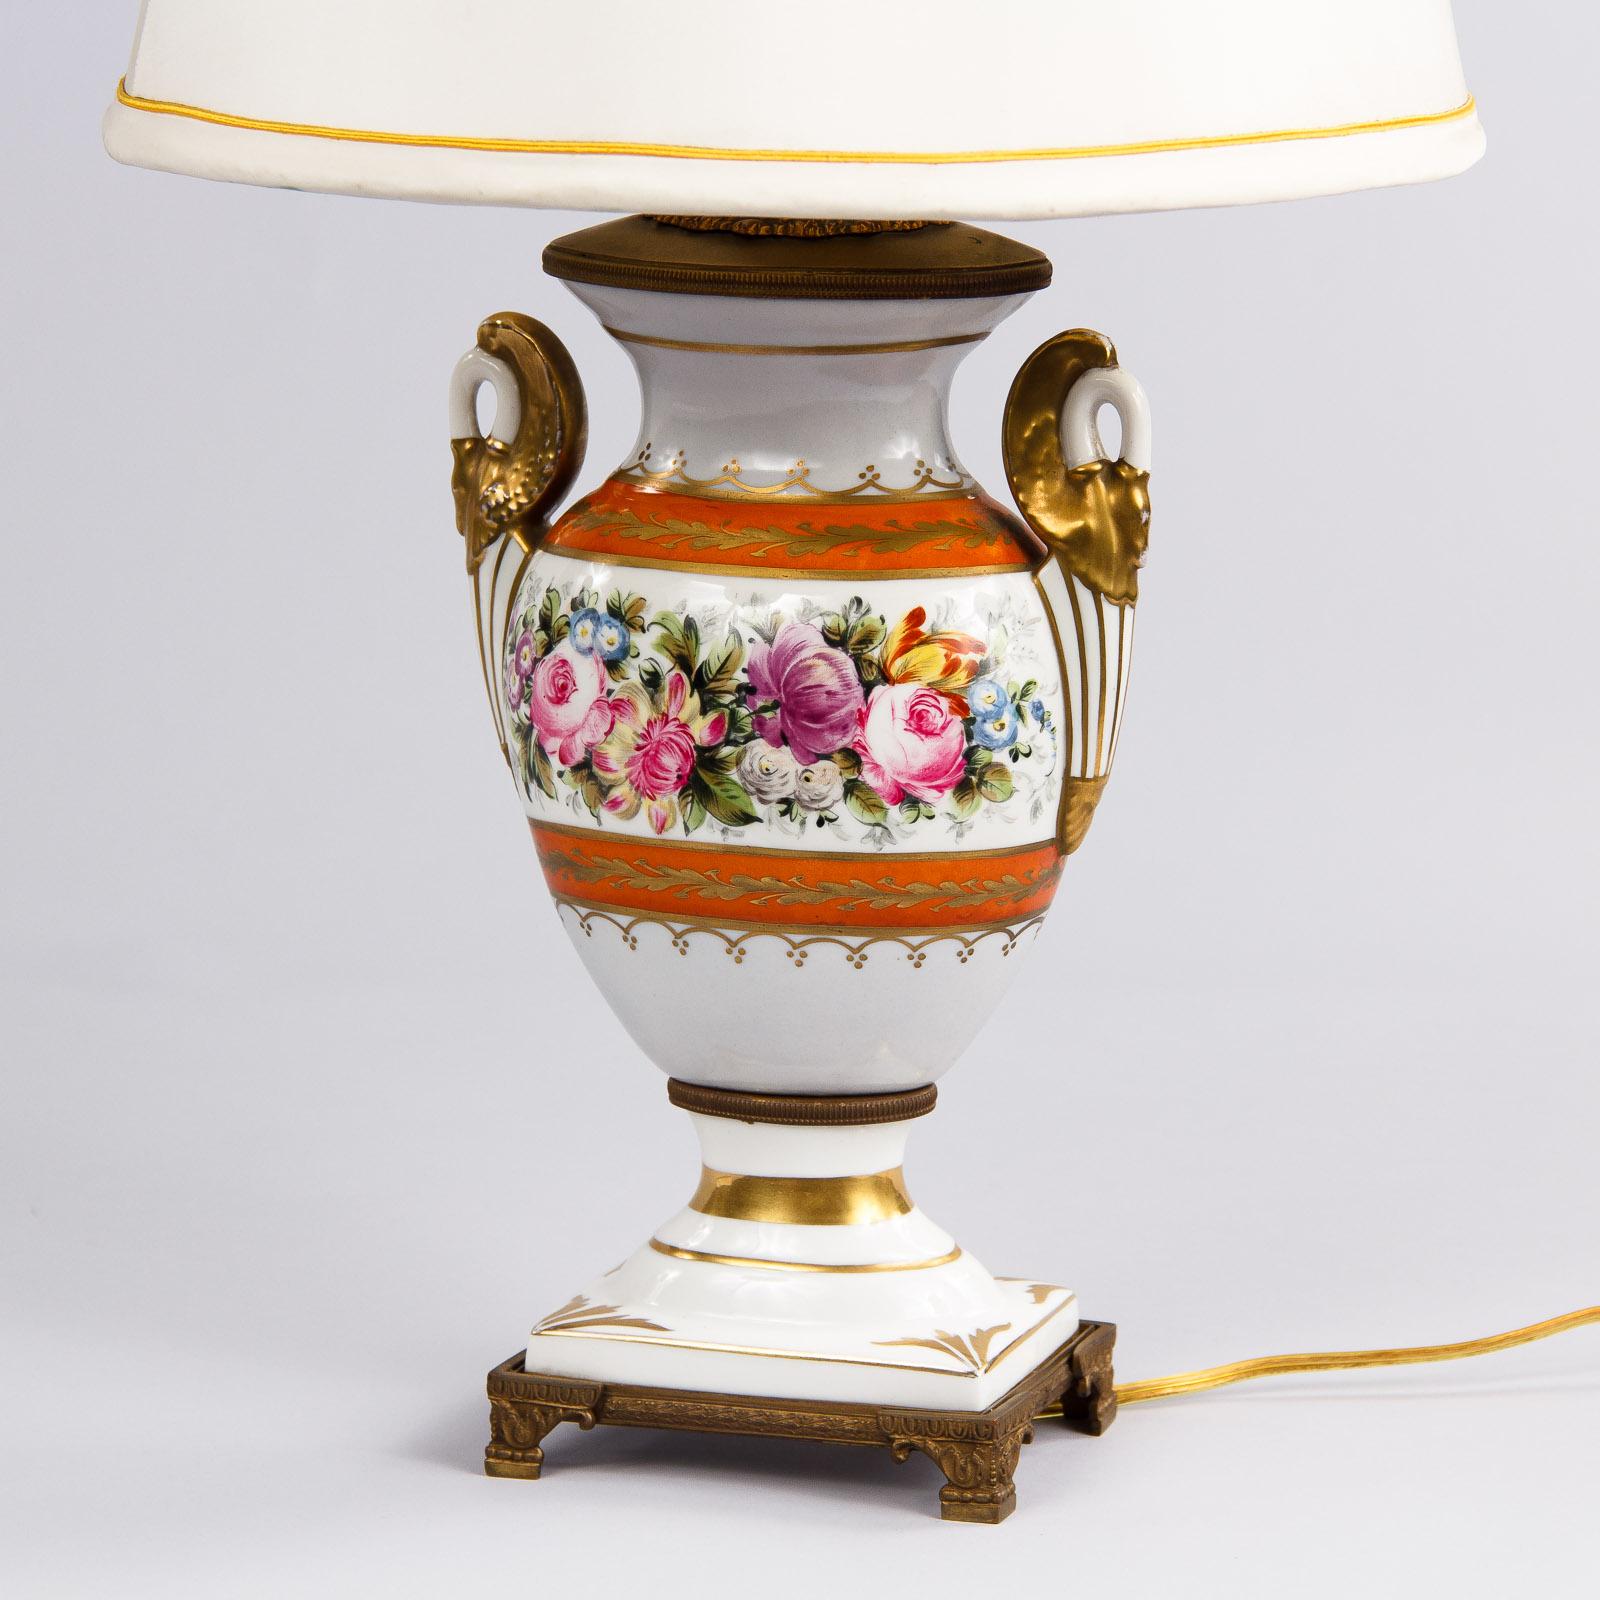 20th Century French Vieux Paris Ceramic Table Lamp, Early 1900s For Sale